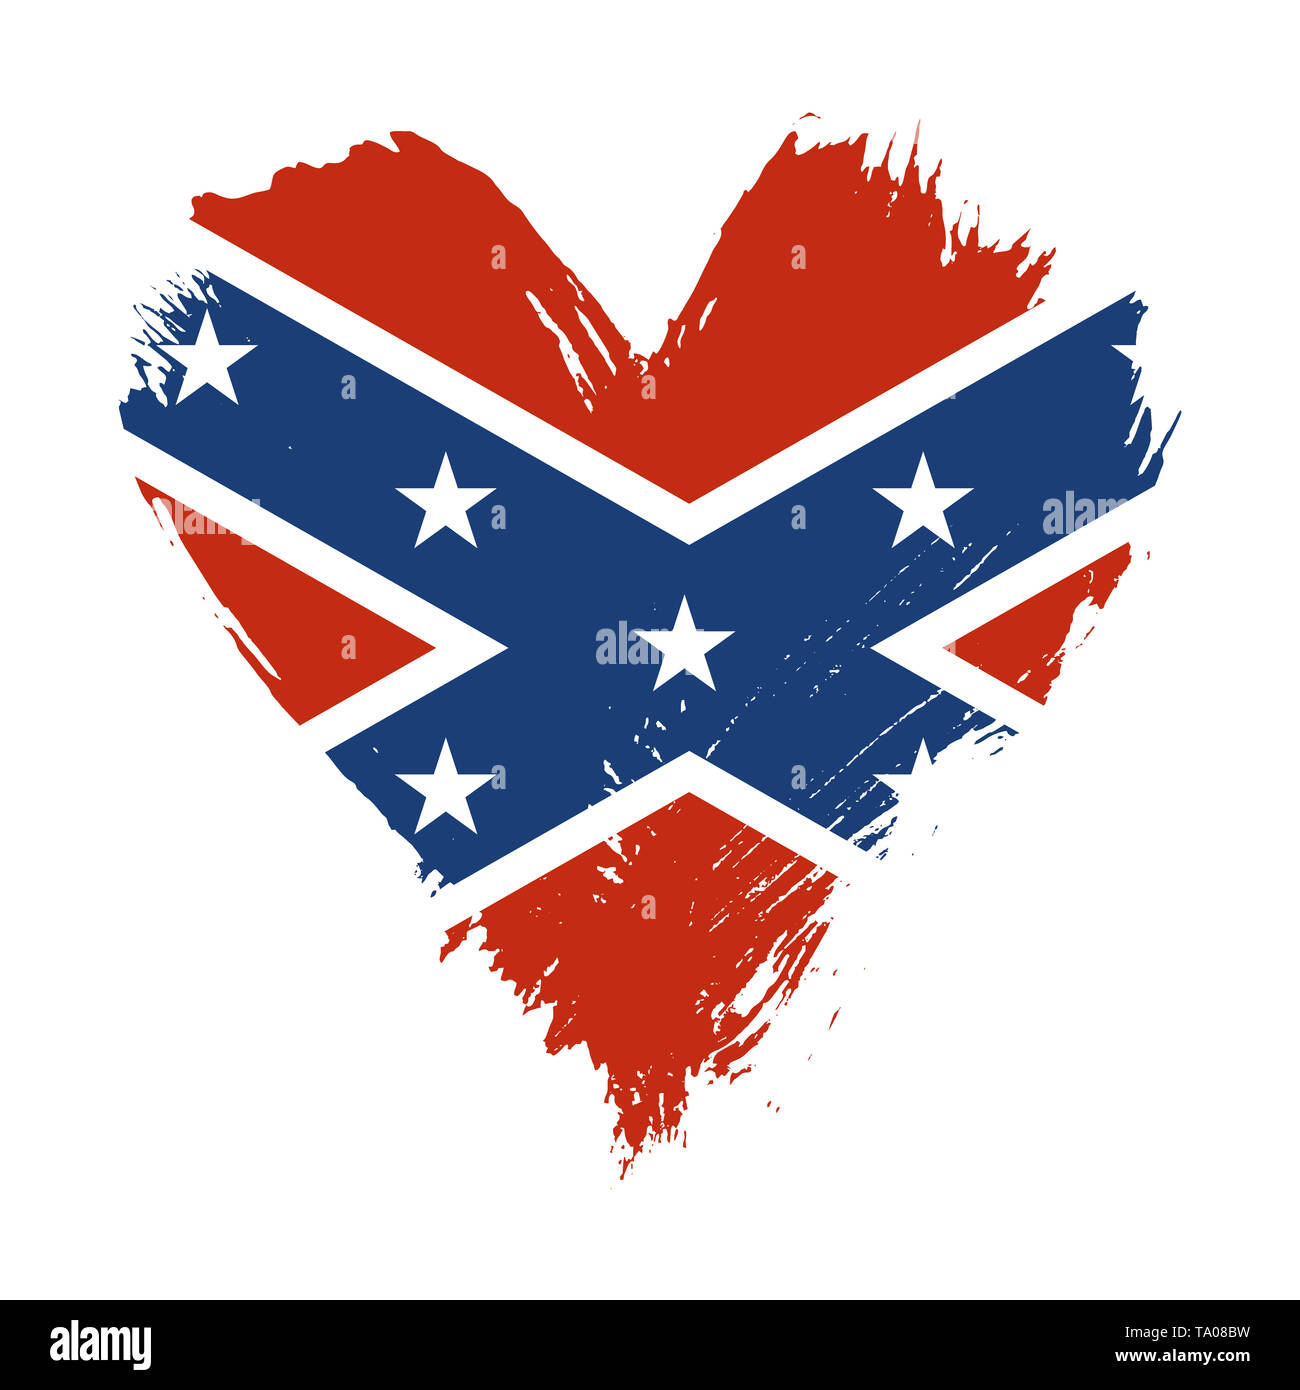 grunge-brushstroke-painted-illustration-of-heart-shaped-distressed-american-us-confederate-flag-isolated-on-white-background-TA08BW.jpg